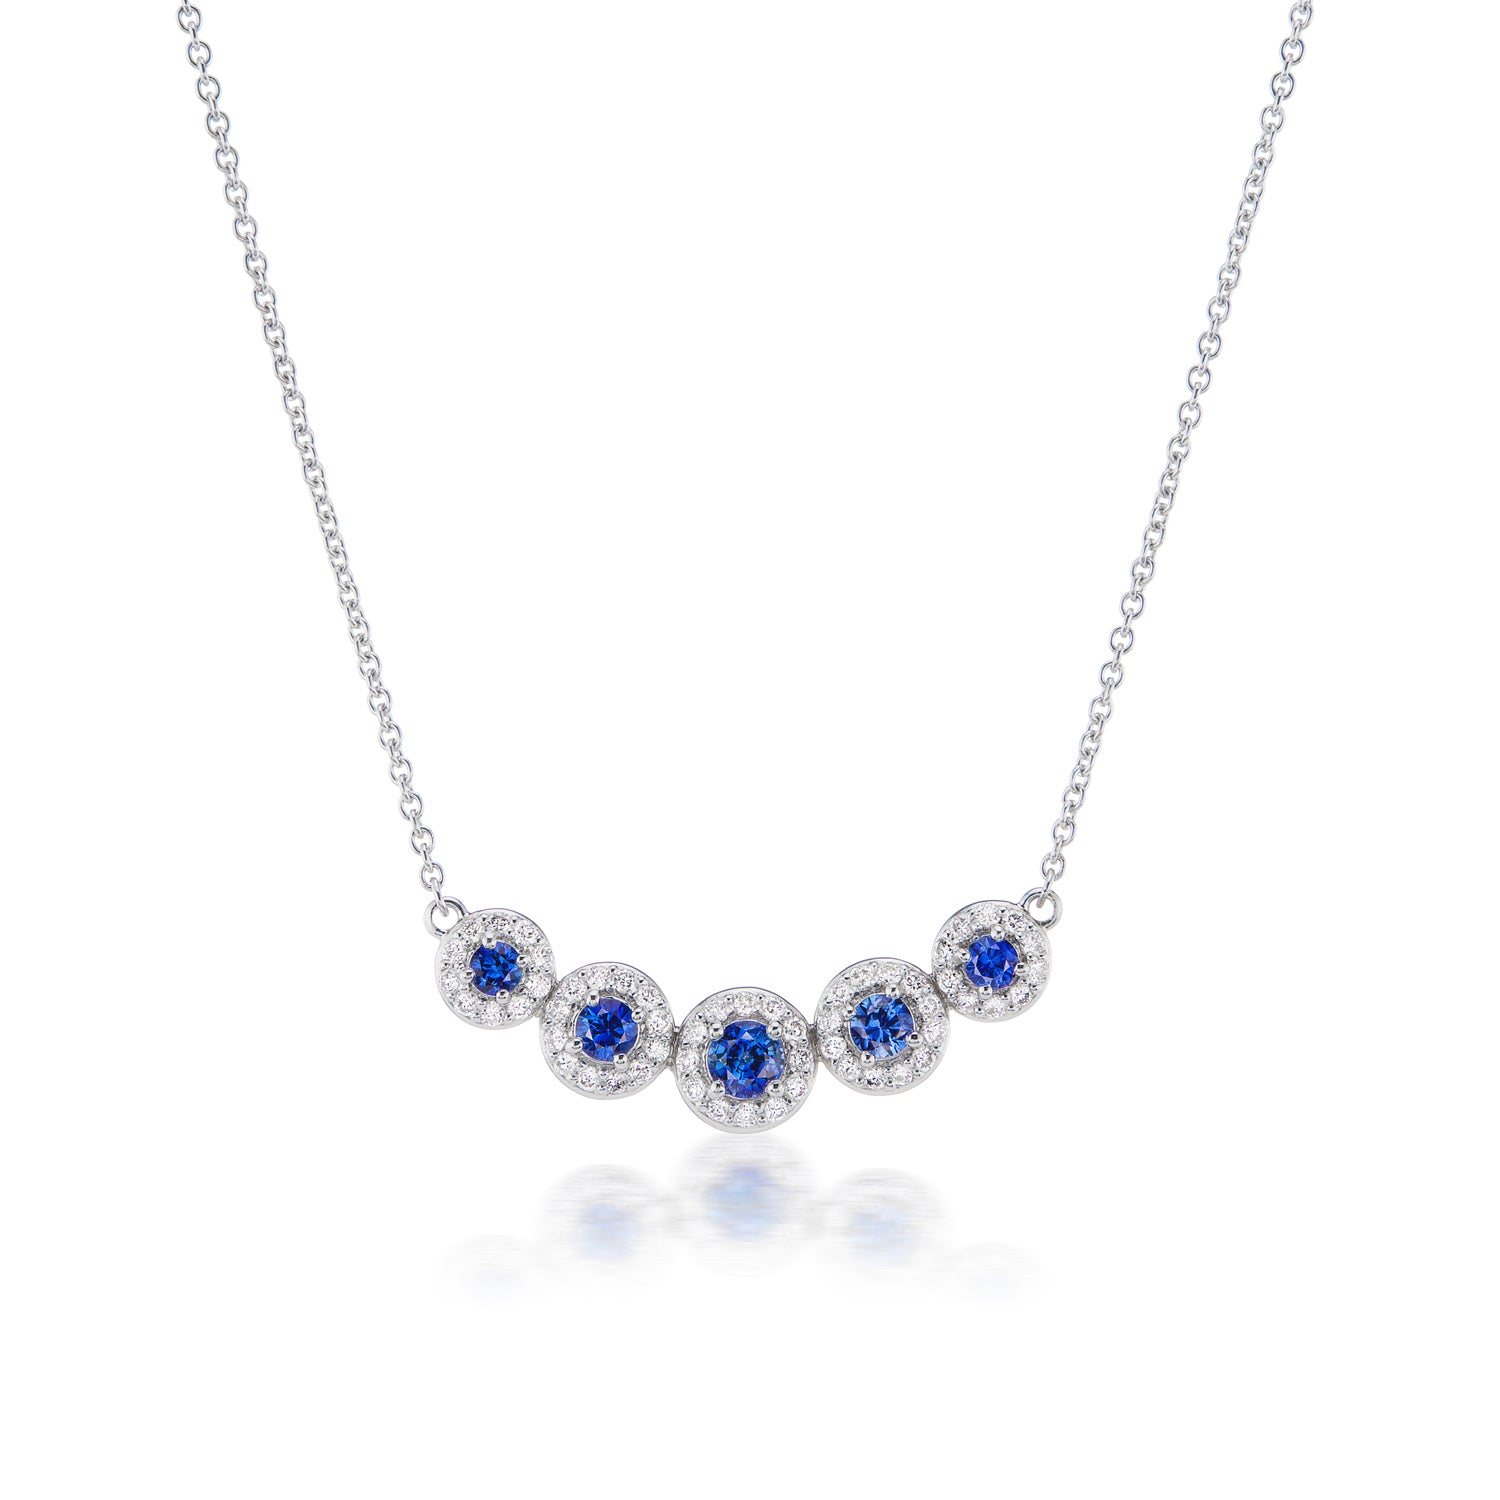 Curved Sapphire and Diamond Halo Necklace